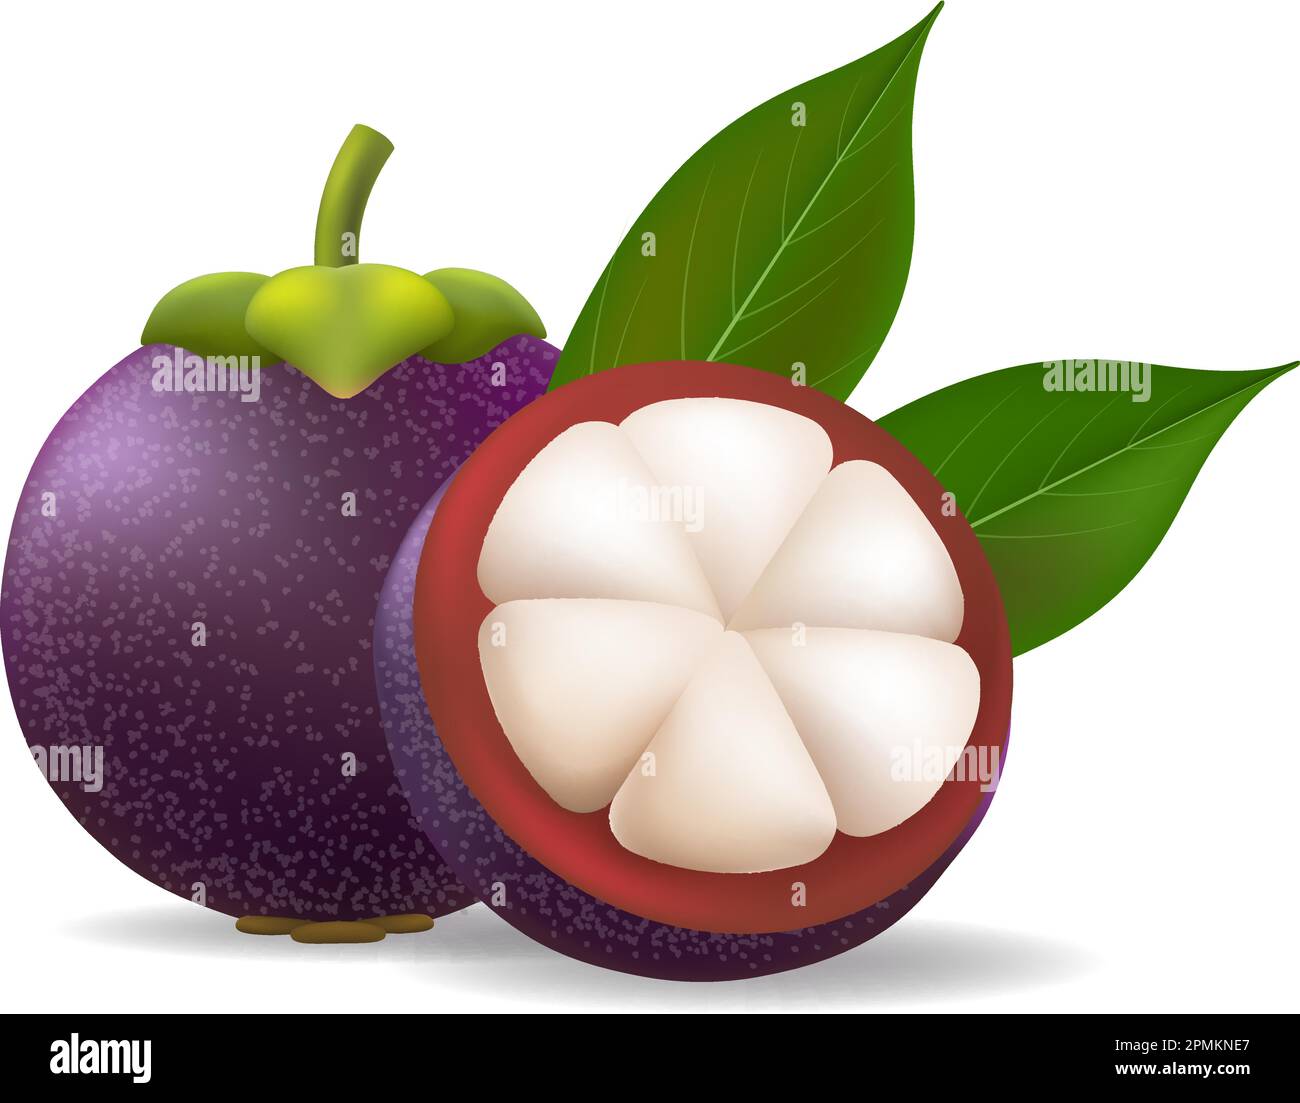 Realistic mangosteen on transparent background Stock Vector